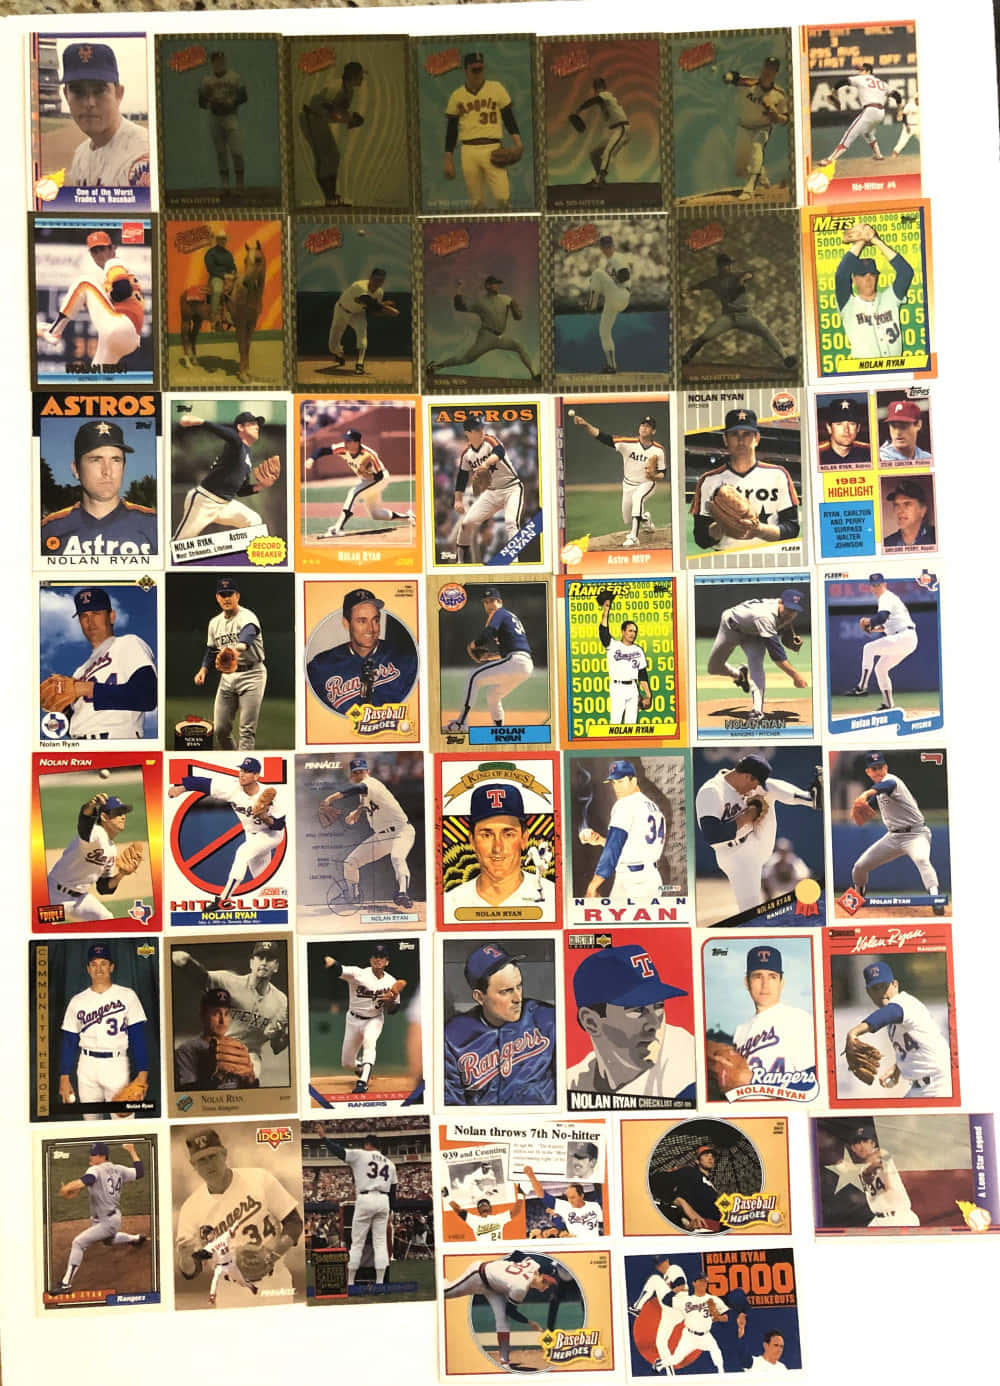 A colorful collection of vintage baseball cards spread across the table. Wallpaper